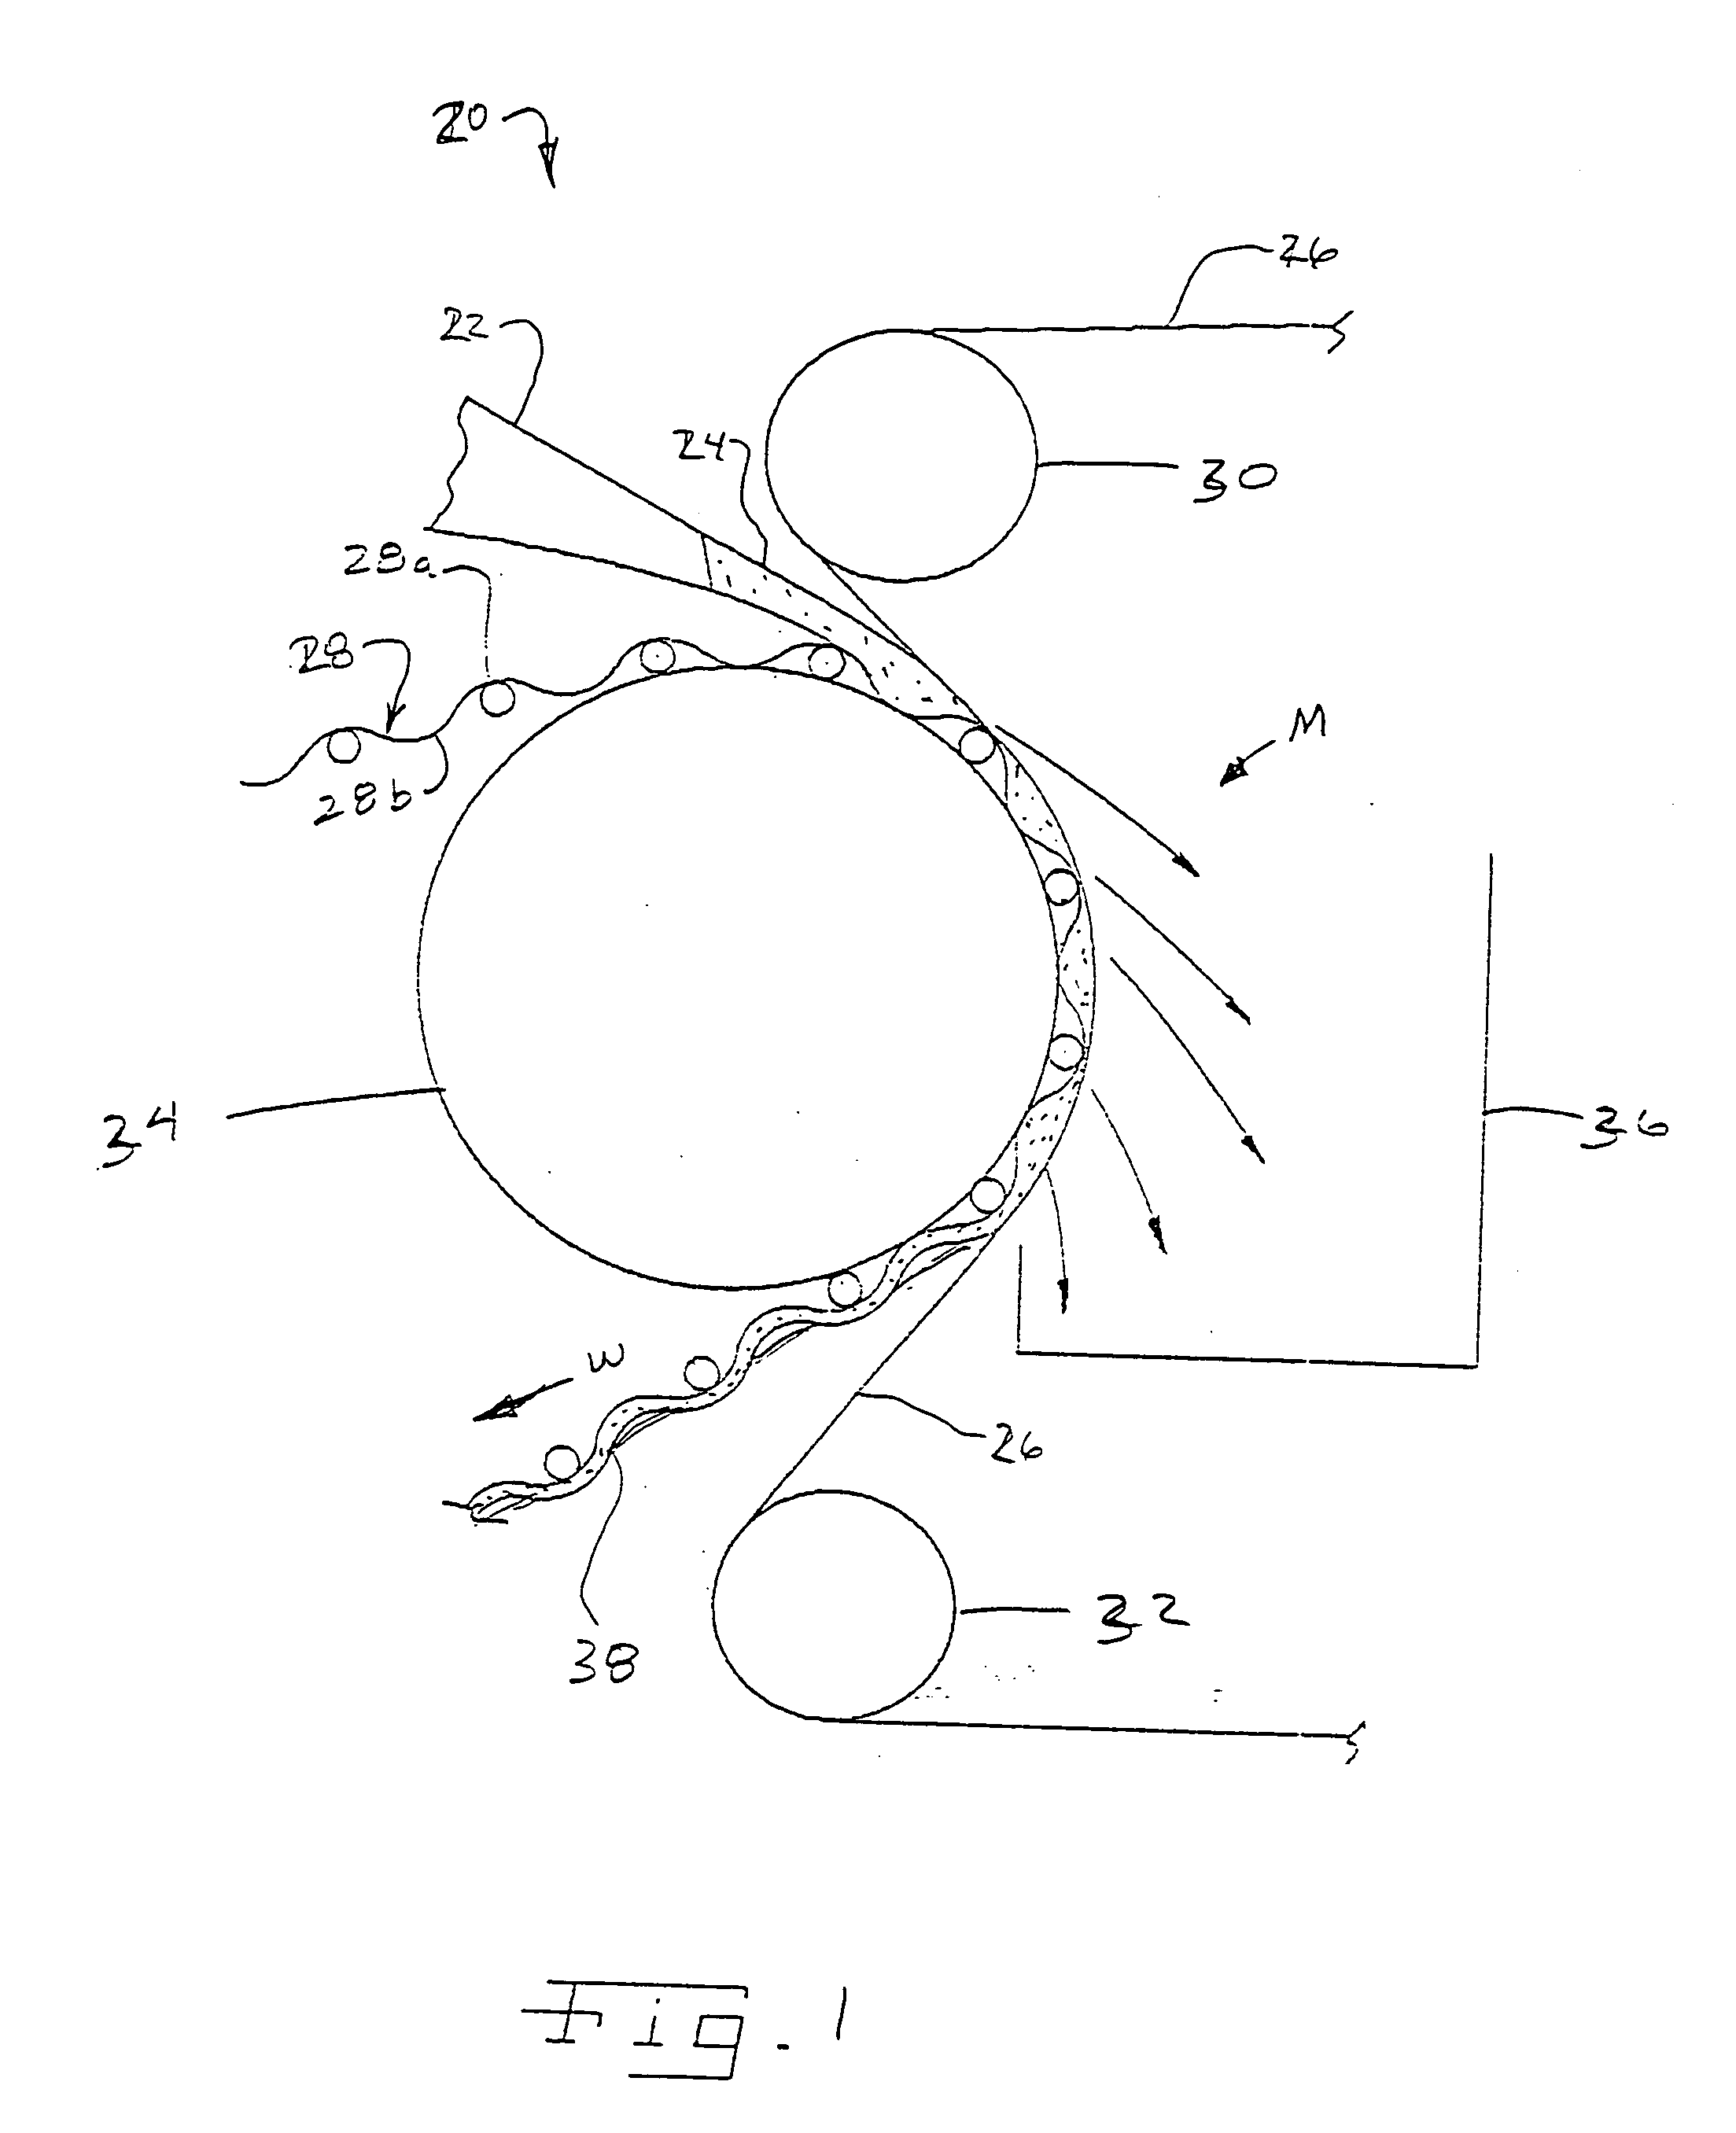 Apparatus for and process of material web formation on a structured fabric in a paper machine